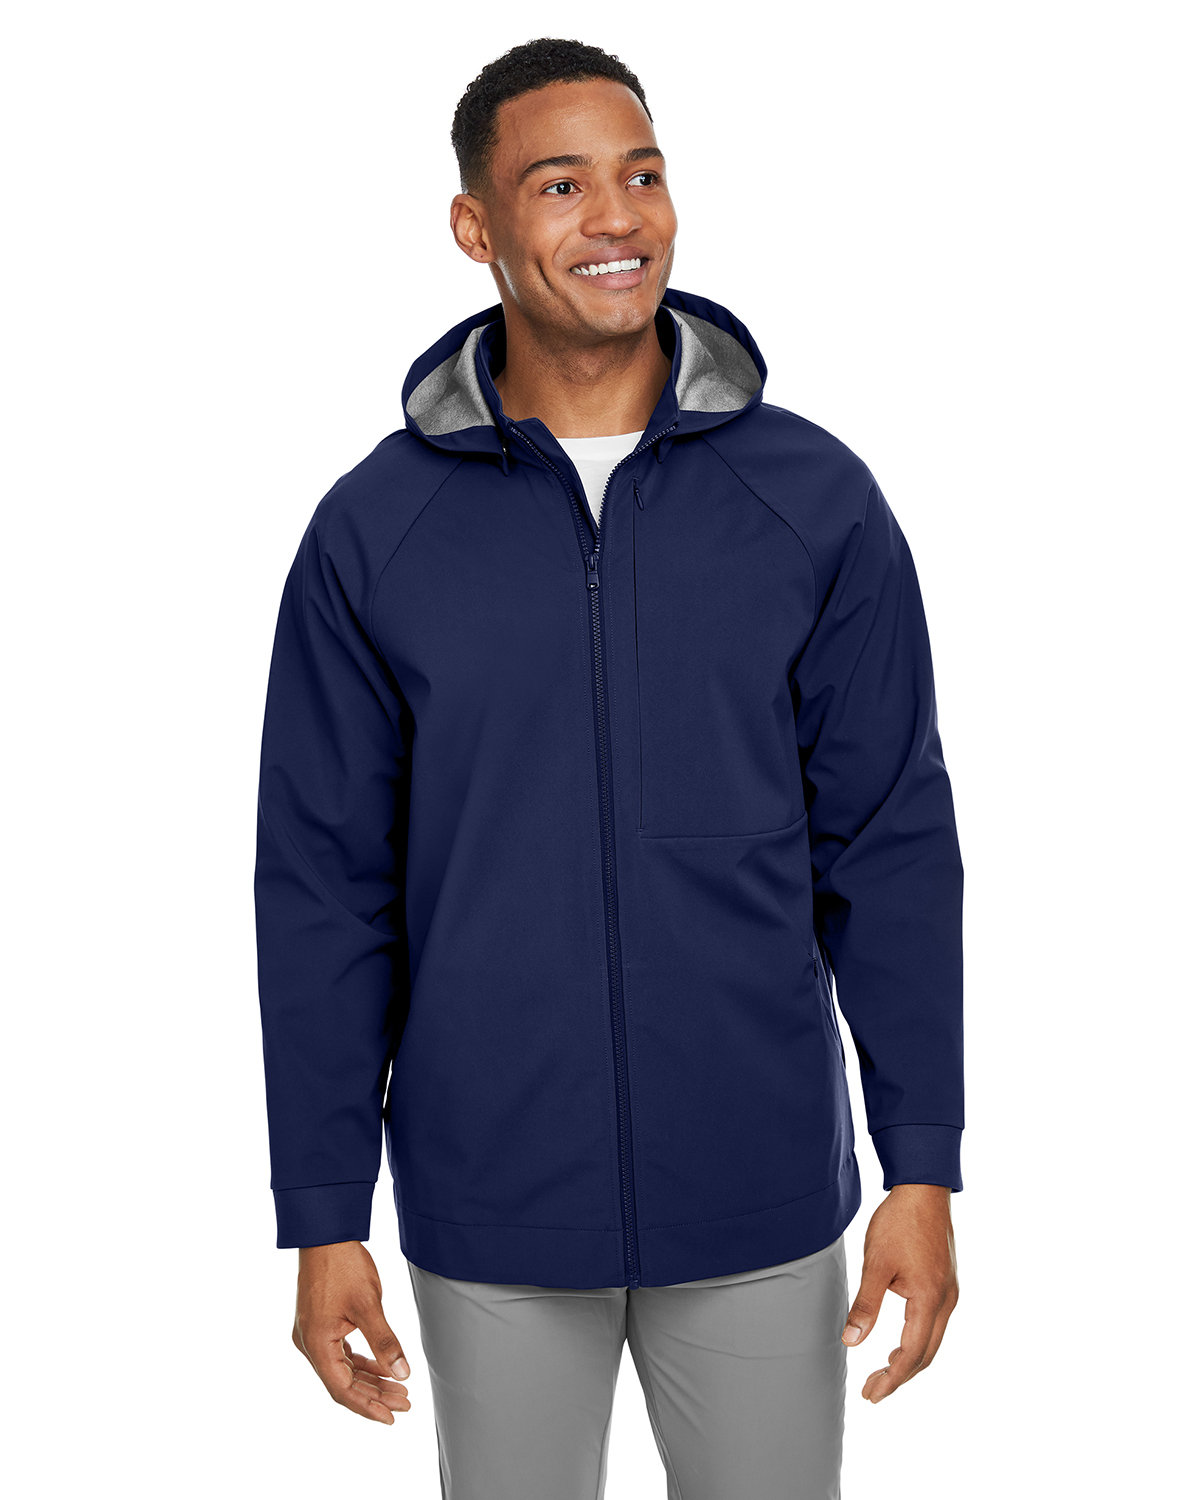 North End Men's City Hybrid Soft Shell Hooded Jacket CLASSIC NAVY 